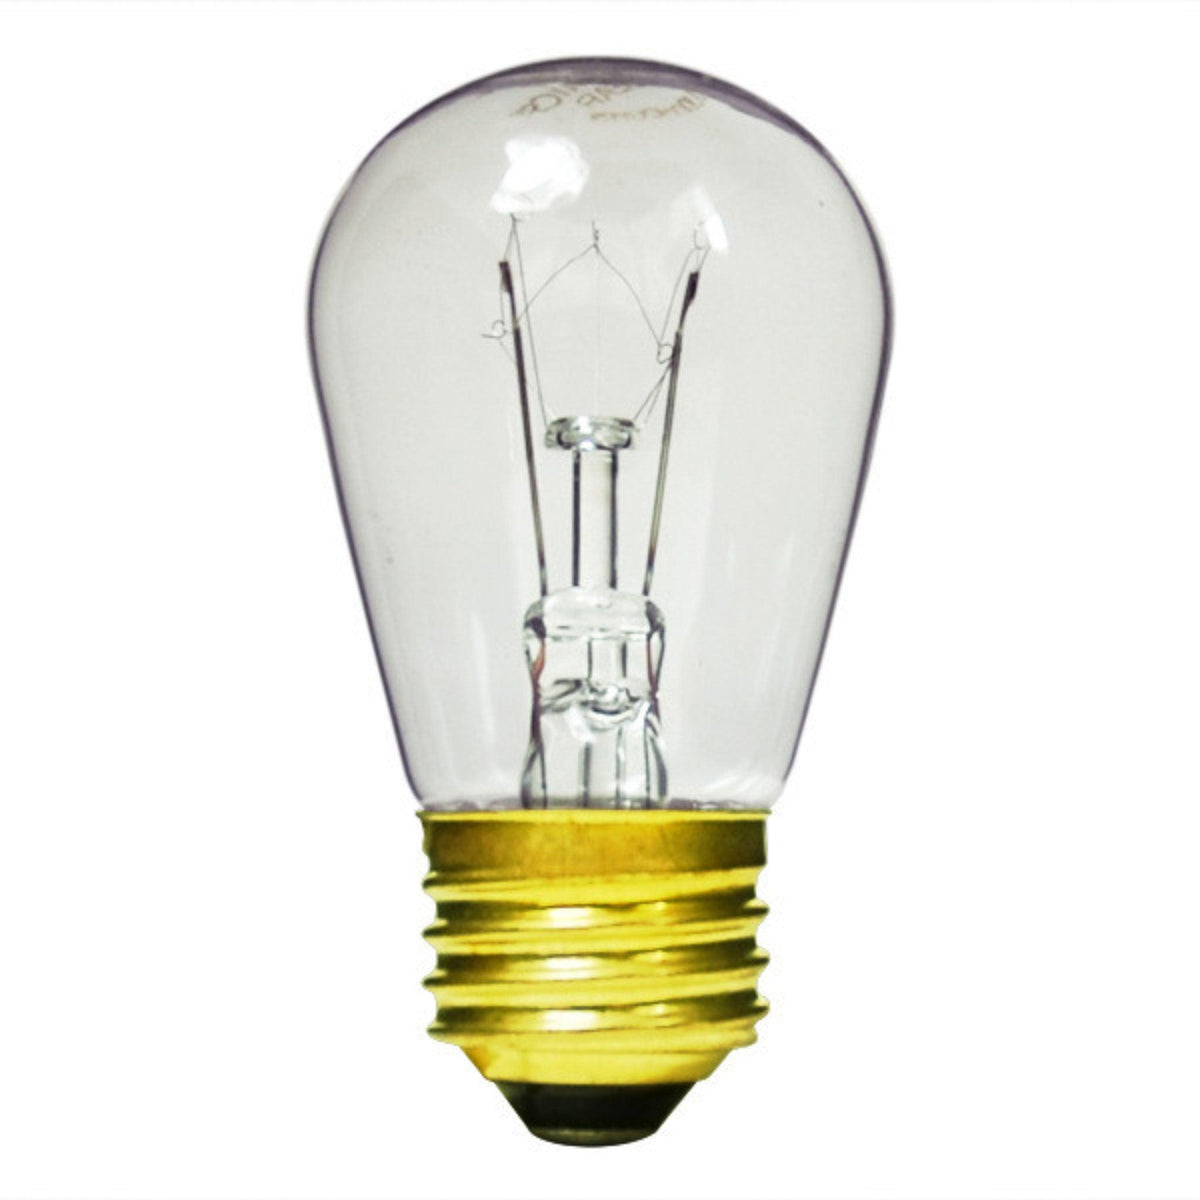 Purchase a box of brand new Edison Light Bulbs from Lee Display!  Clear Warm White Incandescent S14 Replacement Bulbs on sale at leedisplay.com